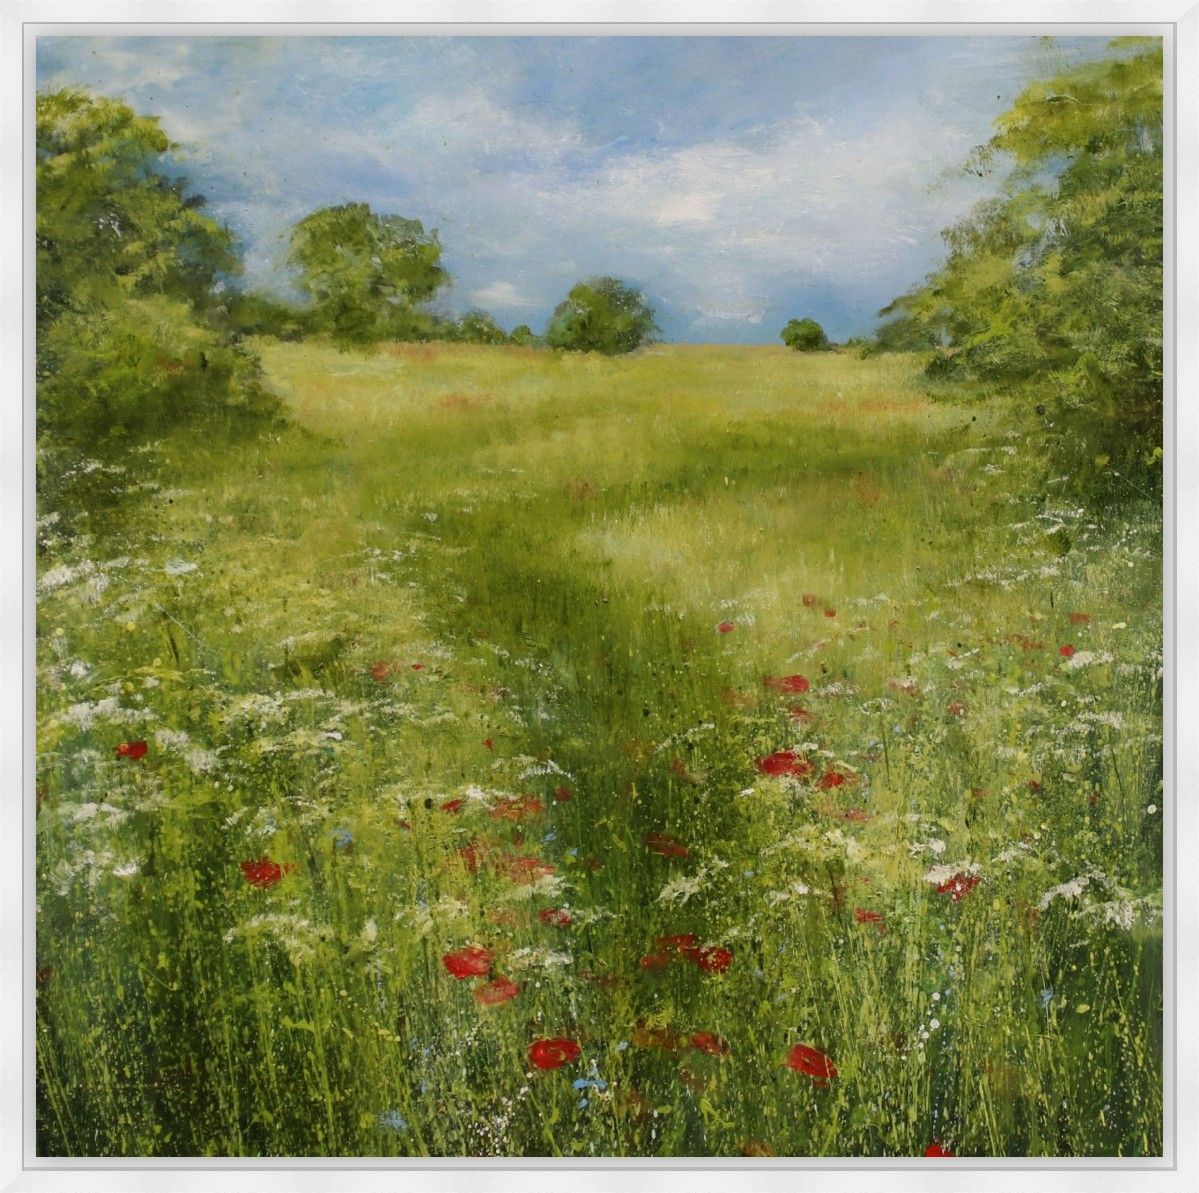 Poppies in the Meadow by Garry Pereira